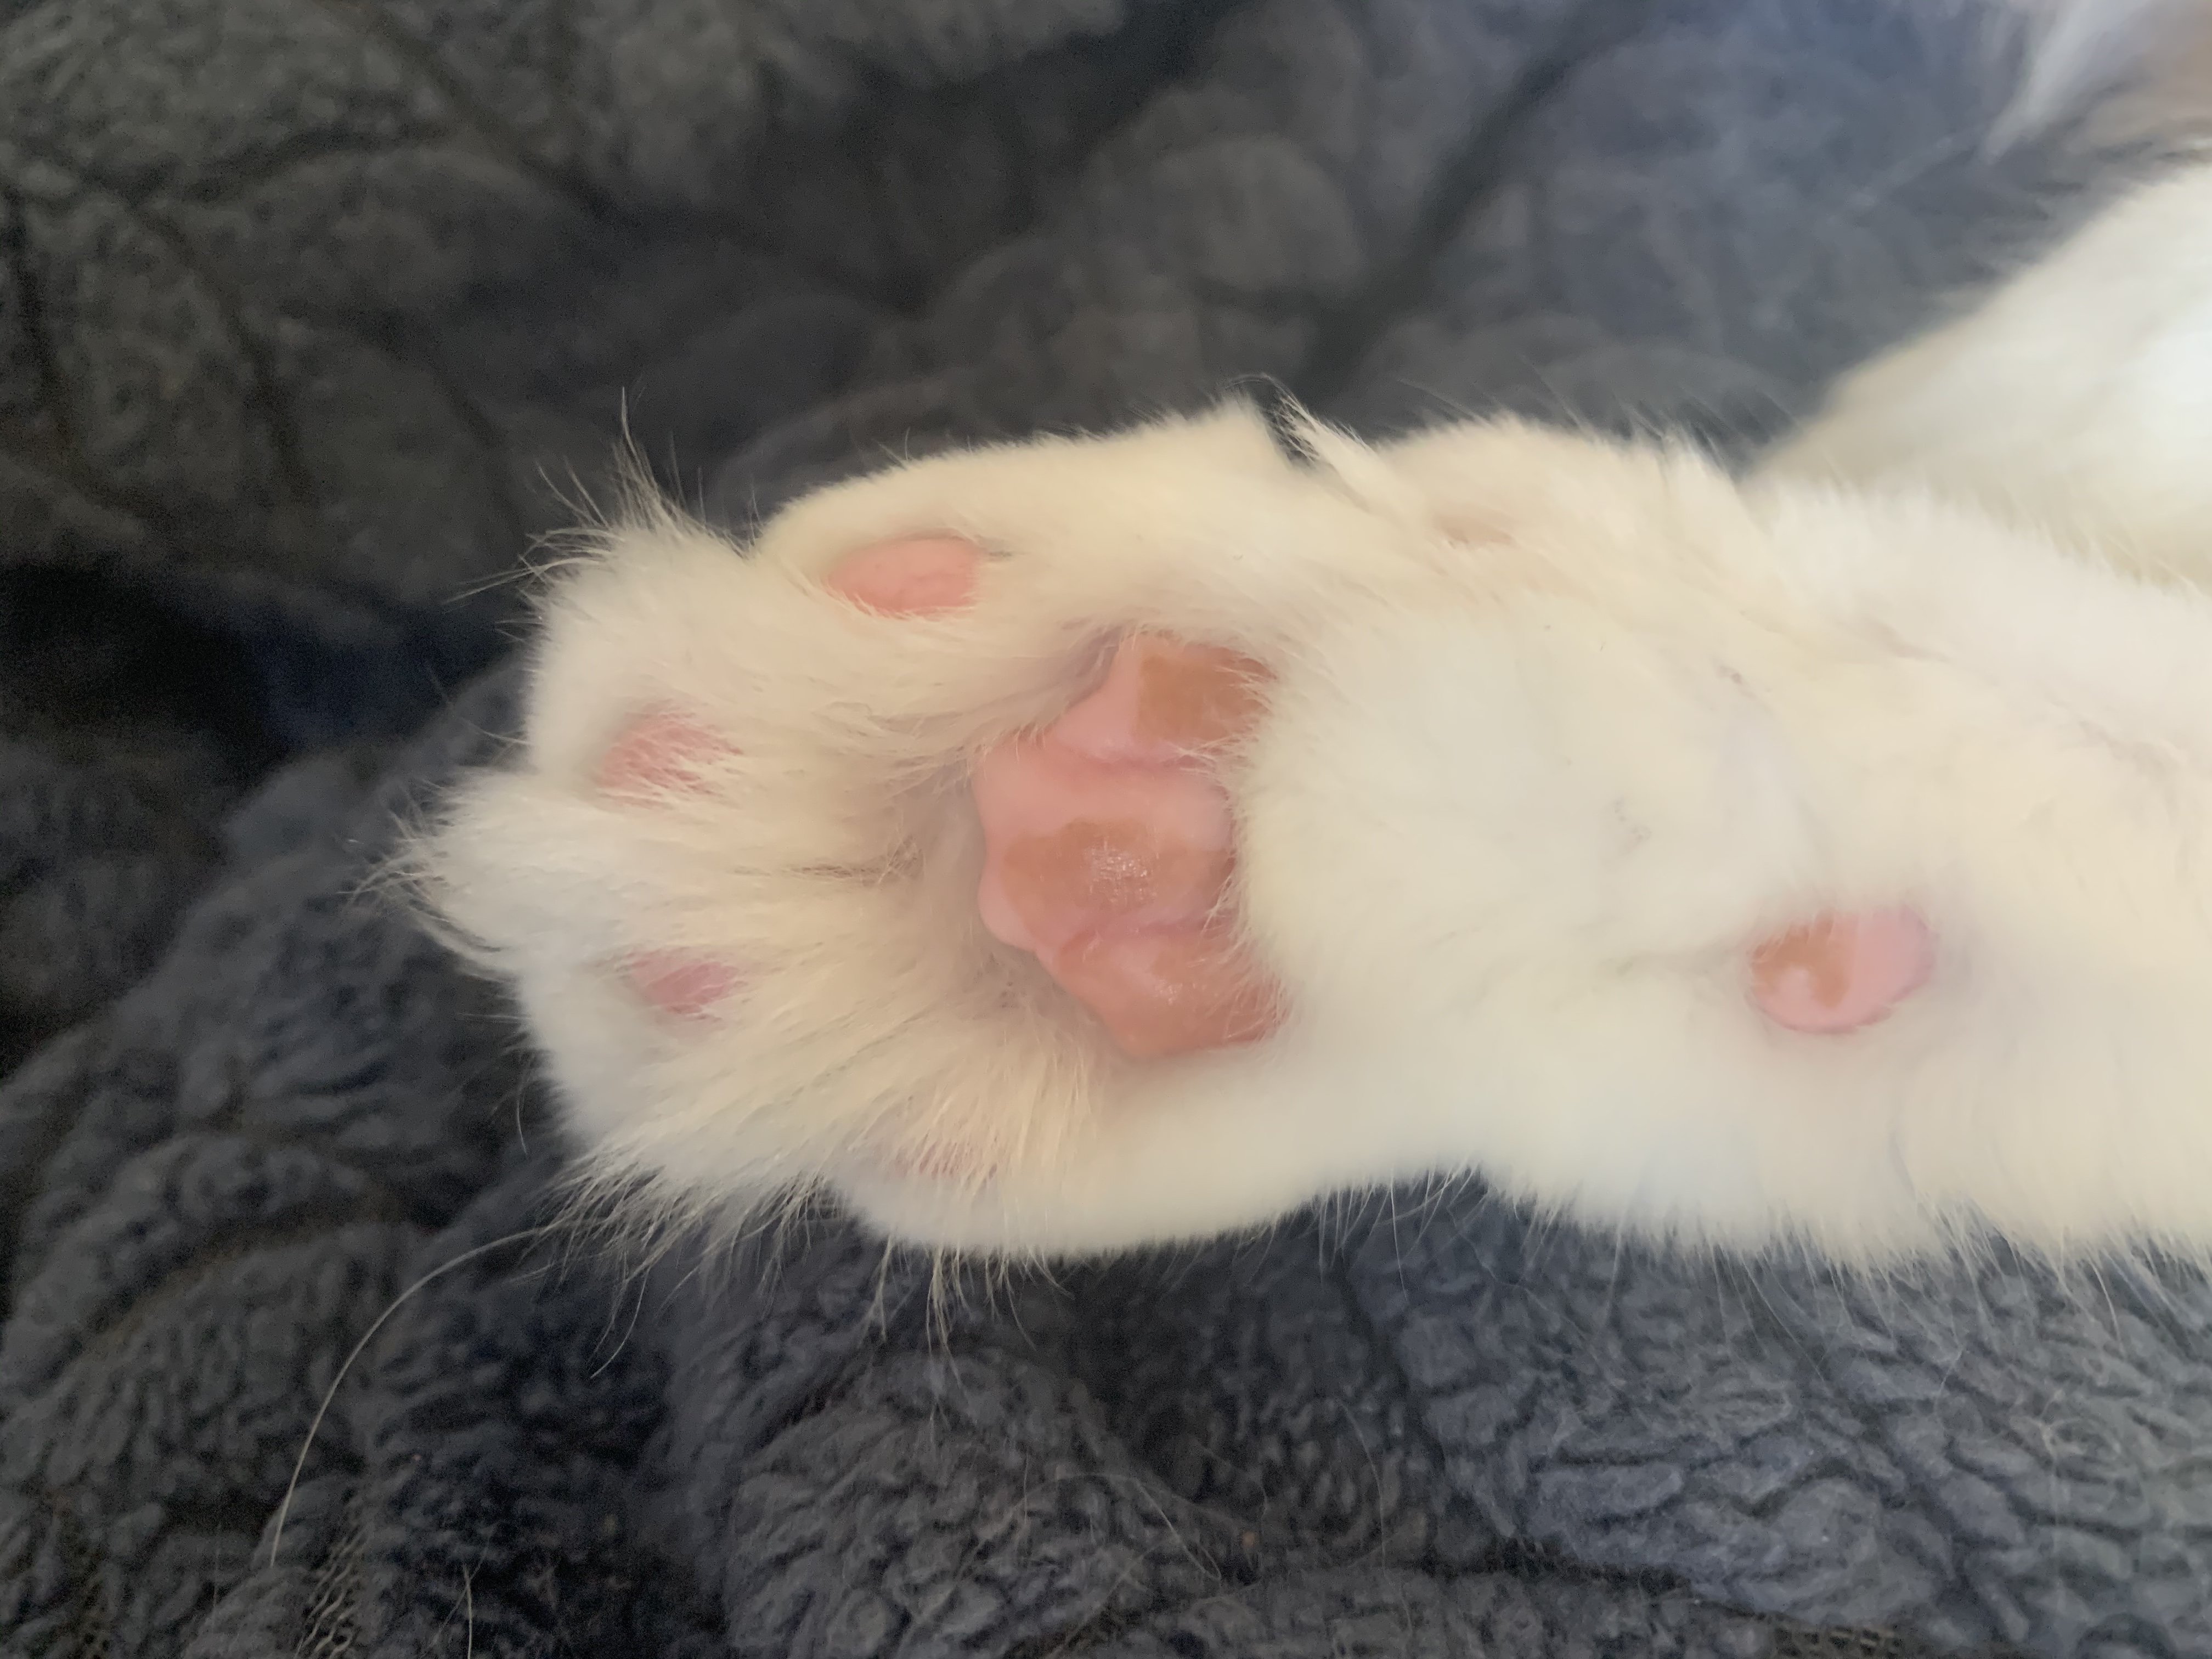 Does anyone know what the discoloration on the bottom of cat’s paw is